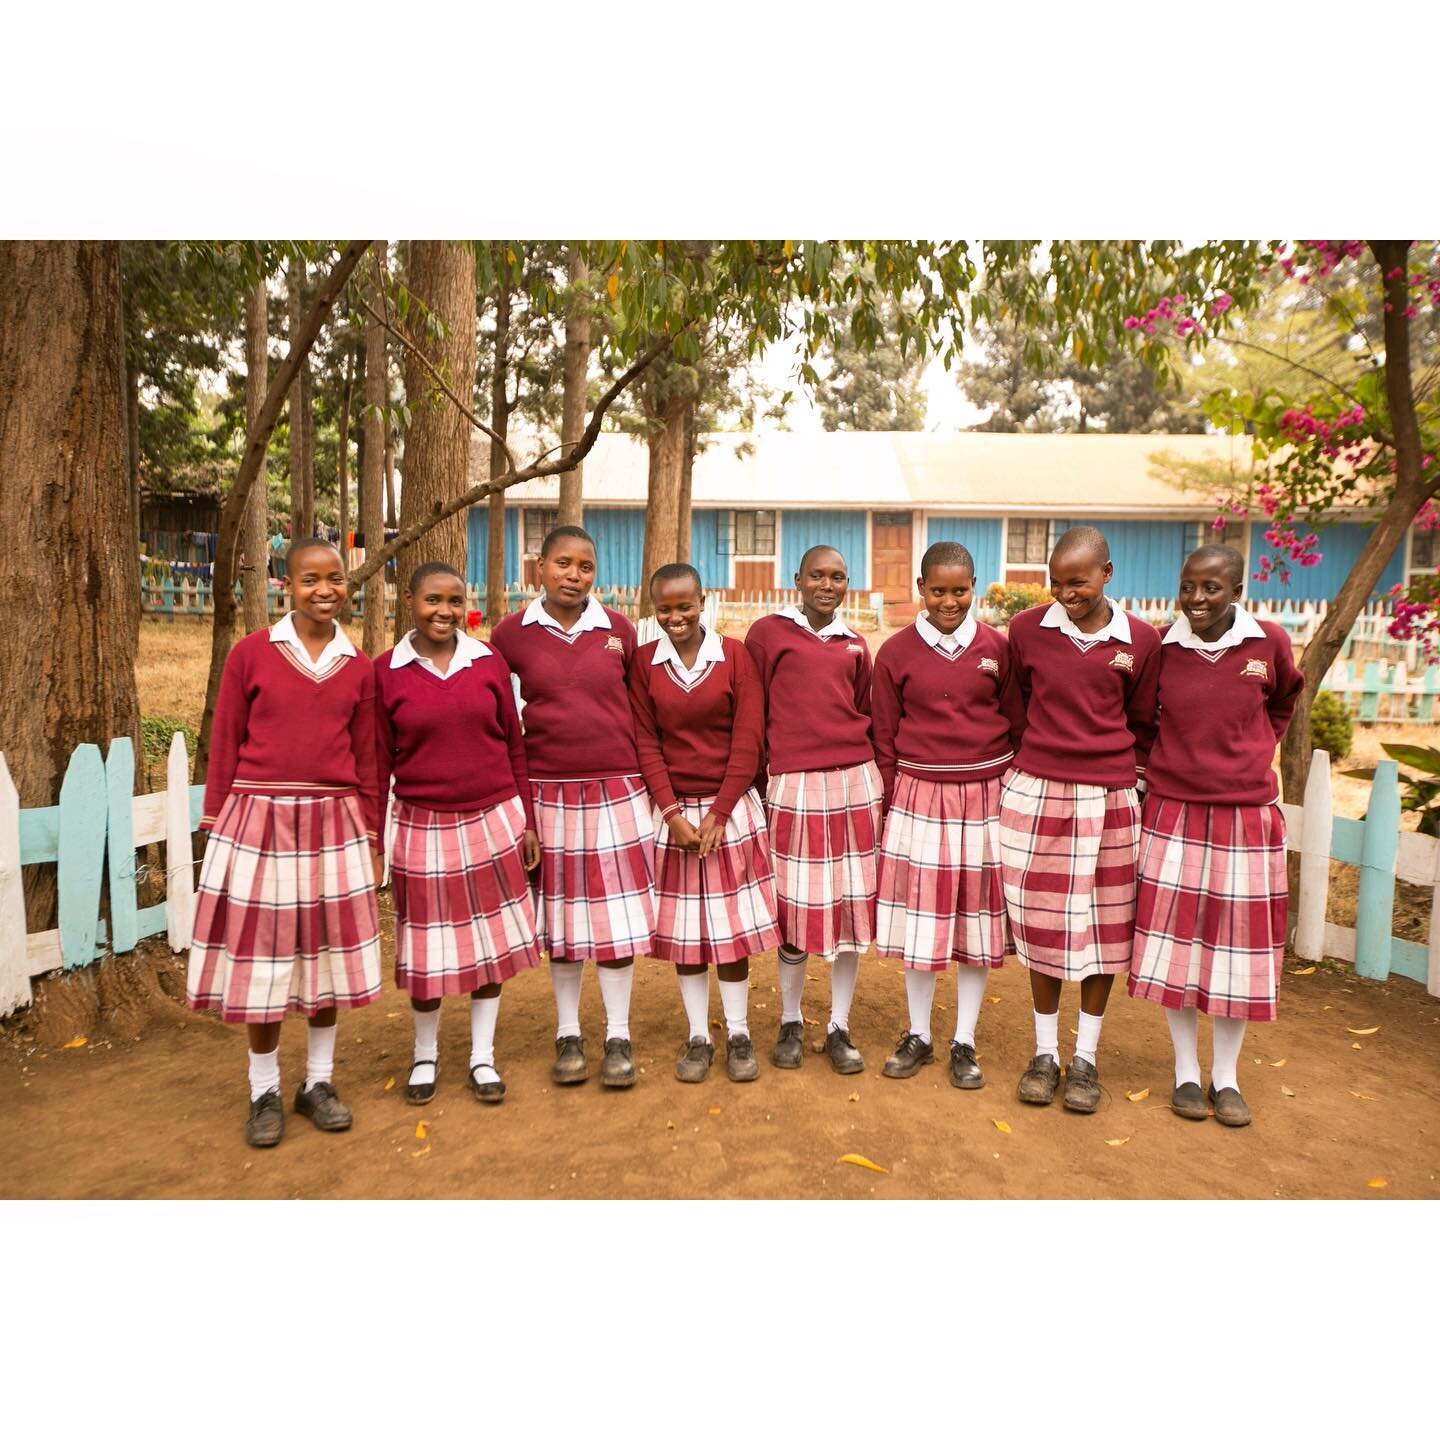 For this #internationalwomensday I&rsquo;d love to honor and send mad props to my original 10 girls in Kenya that were the first women from their village to get a secondary (high school) education.  And had to learn 2 new languages to get there.  The